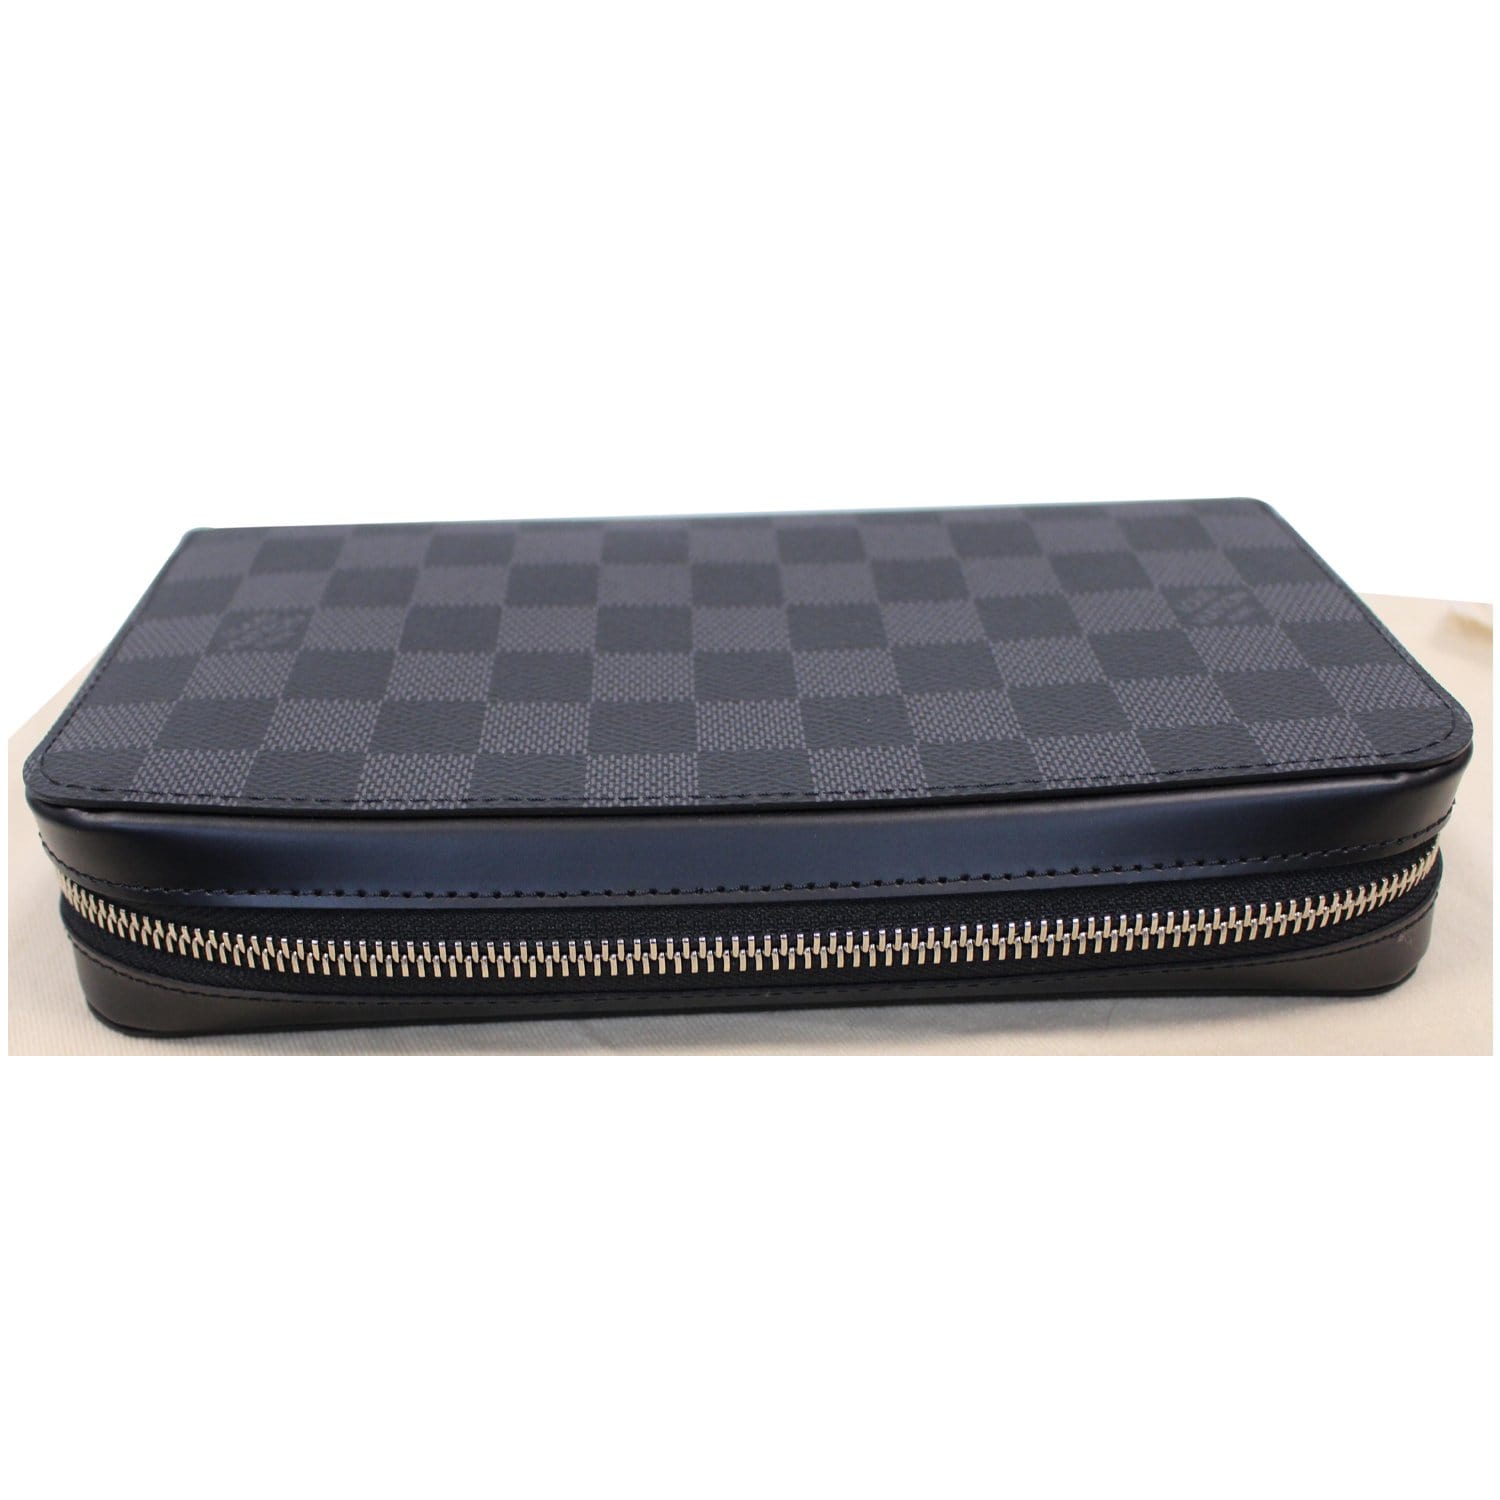 Zippy XL Wallet Damier Infini Leather - Wallets and Small Leather Goods  N61254